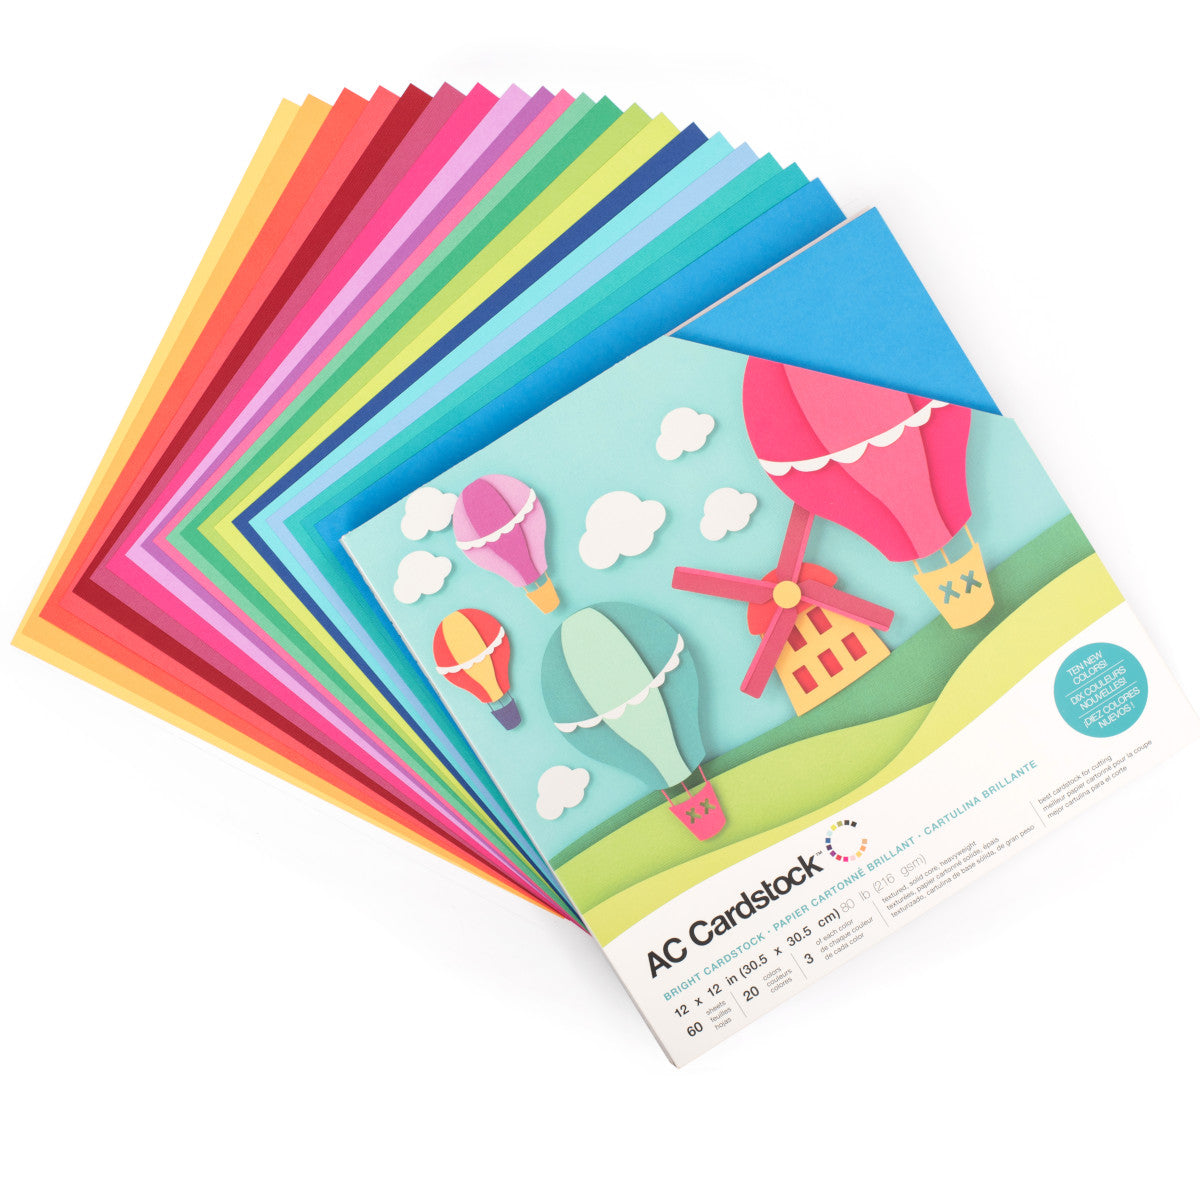 American Crafts 12x12 Card Stock Pack, 60 Sheets Total 3 Sheets Of 20  Colors, Tropical Arts Crafts Supplies Celebration Paper Card Stock Colored  Card